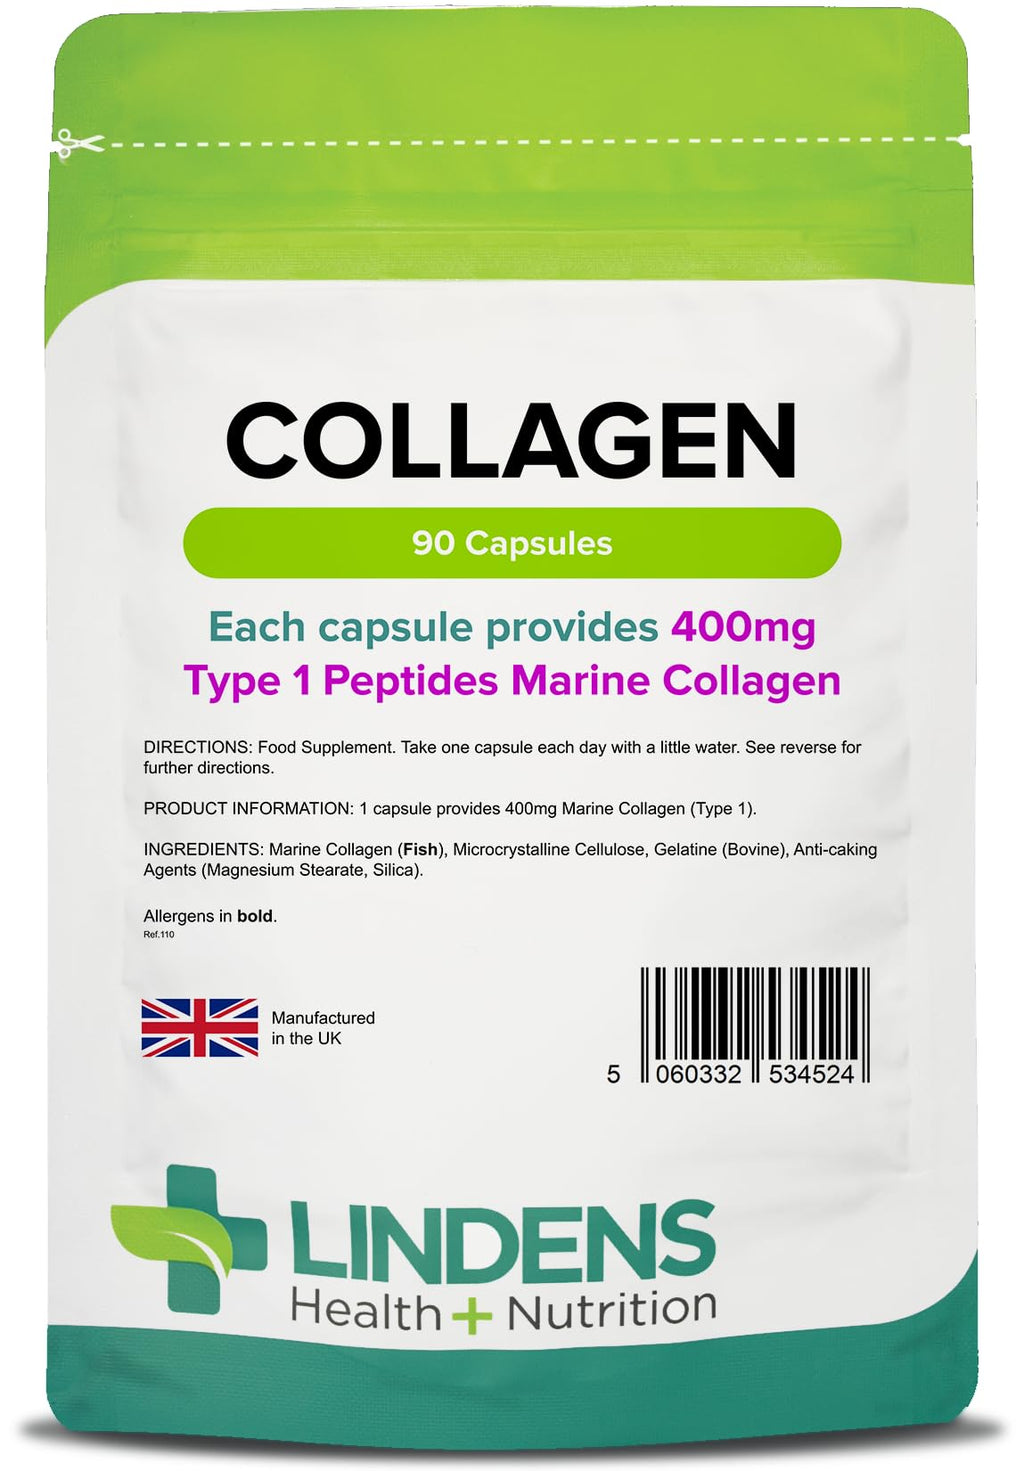 [Australia] - Lindens Collagen (Marine) 400mg Capsules - 90 Pack - Marine Source Hydrolysed Collagen in A Rapid-Release Capsule for Maximum Absorption - UK Manufacturer 90 Count (Pack of 1) 